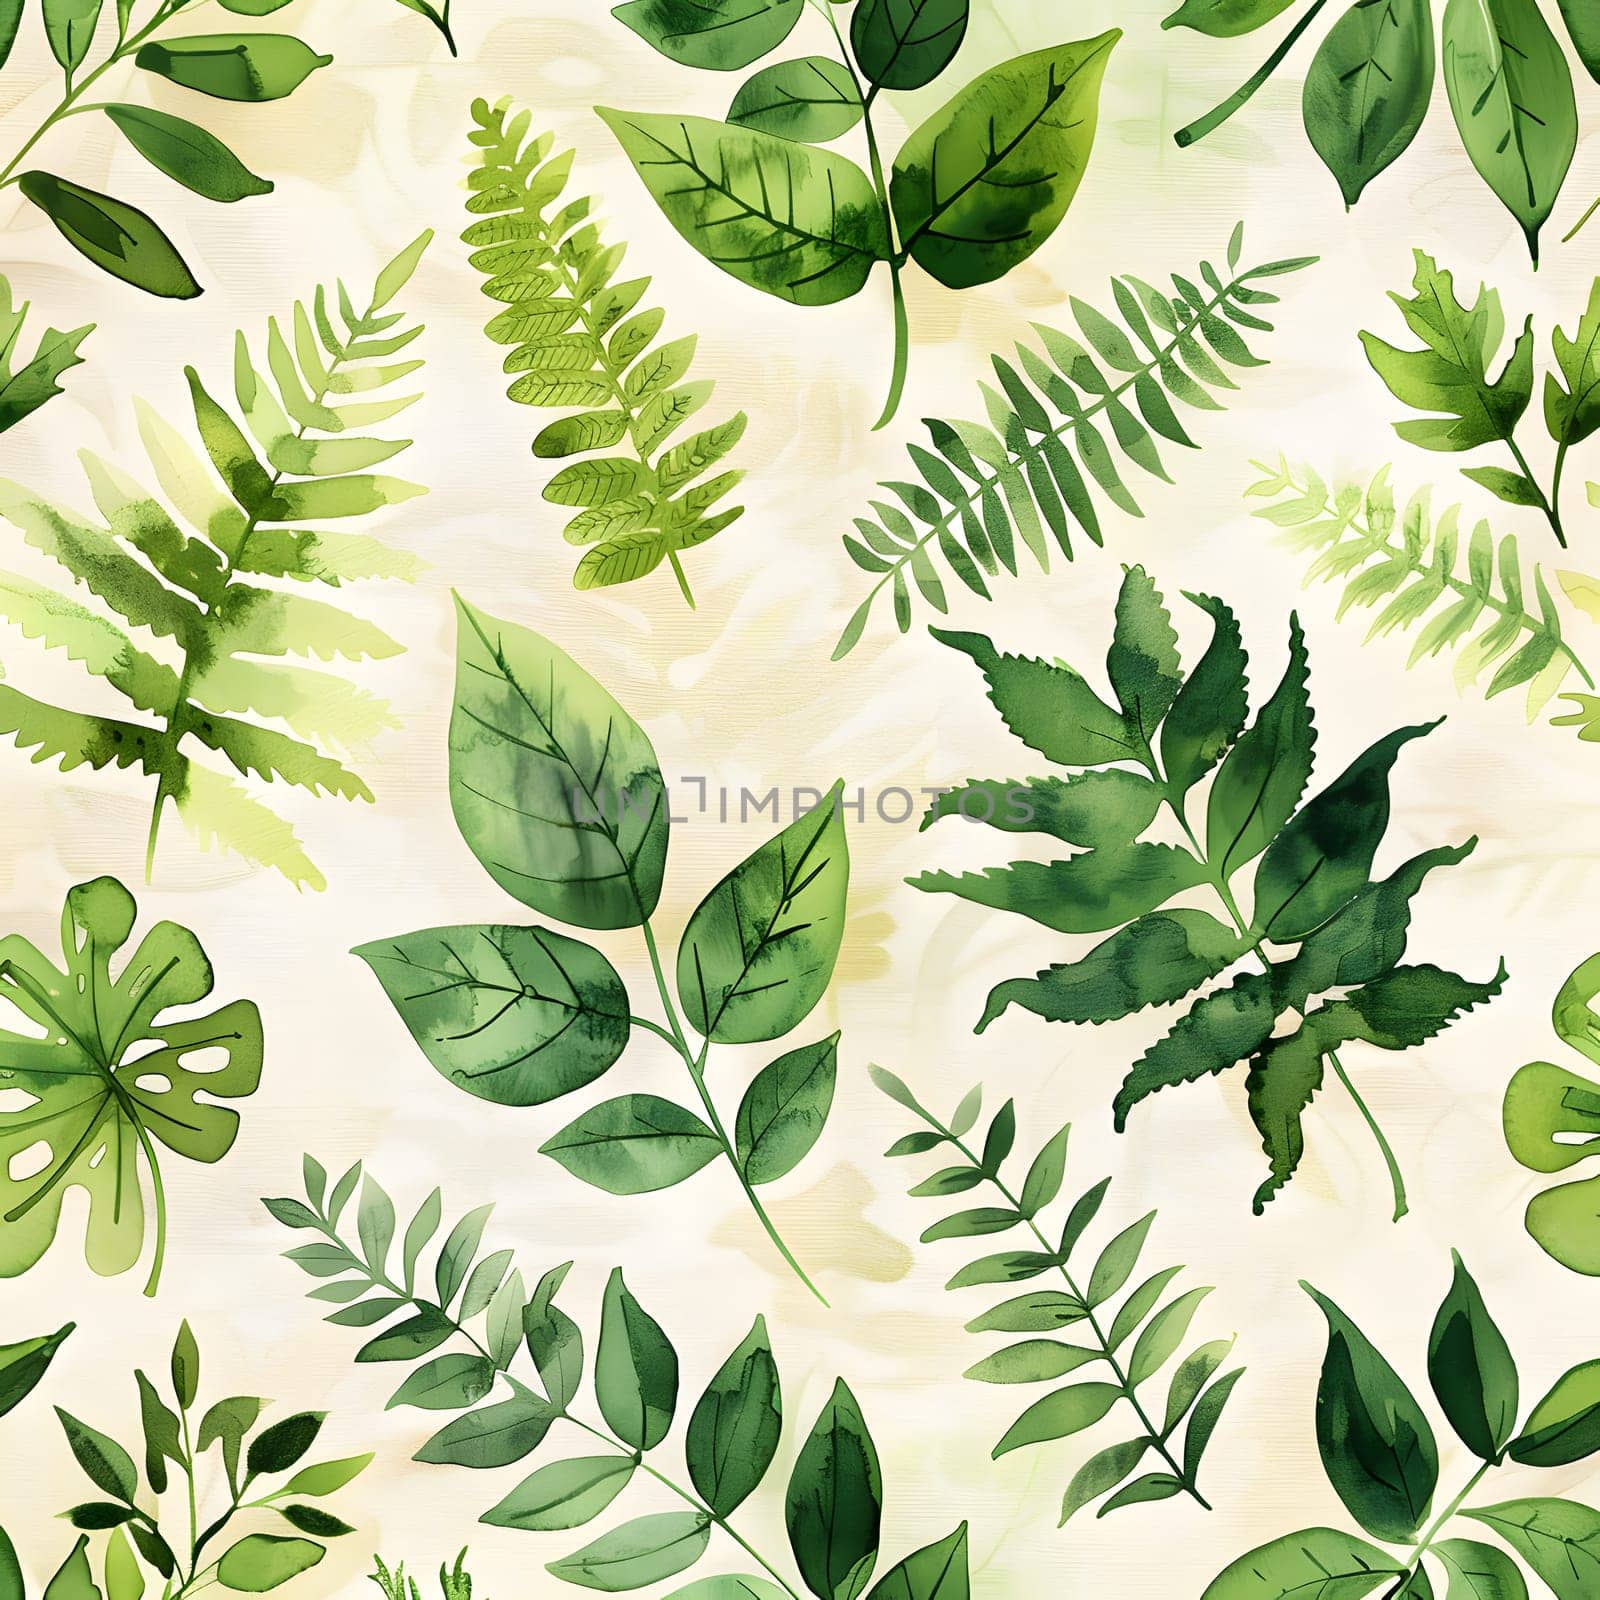 A beautiful seamless pattern of green leaves on a white background, showcasing the intricate details of various plant species. Perfect for nature lovers and botany enthusiasts